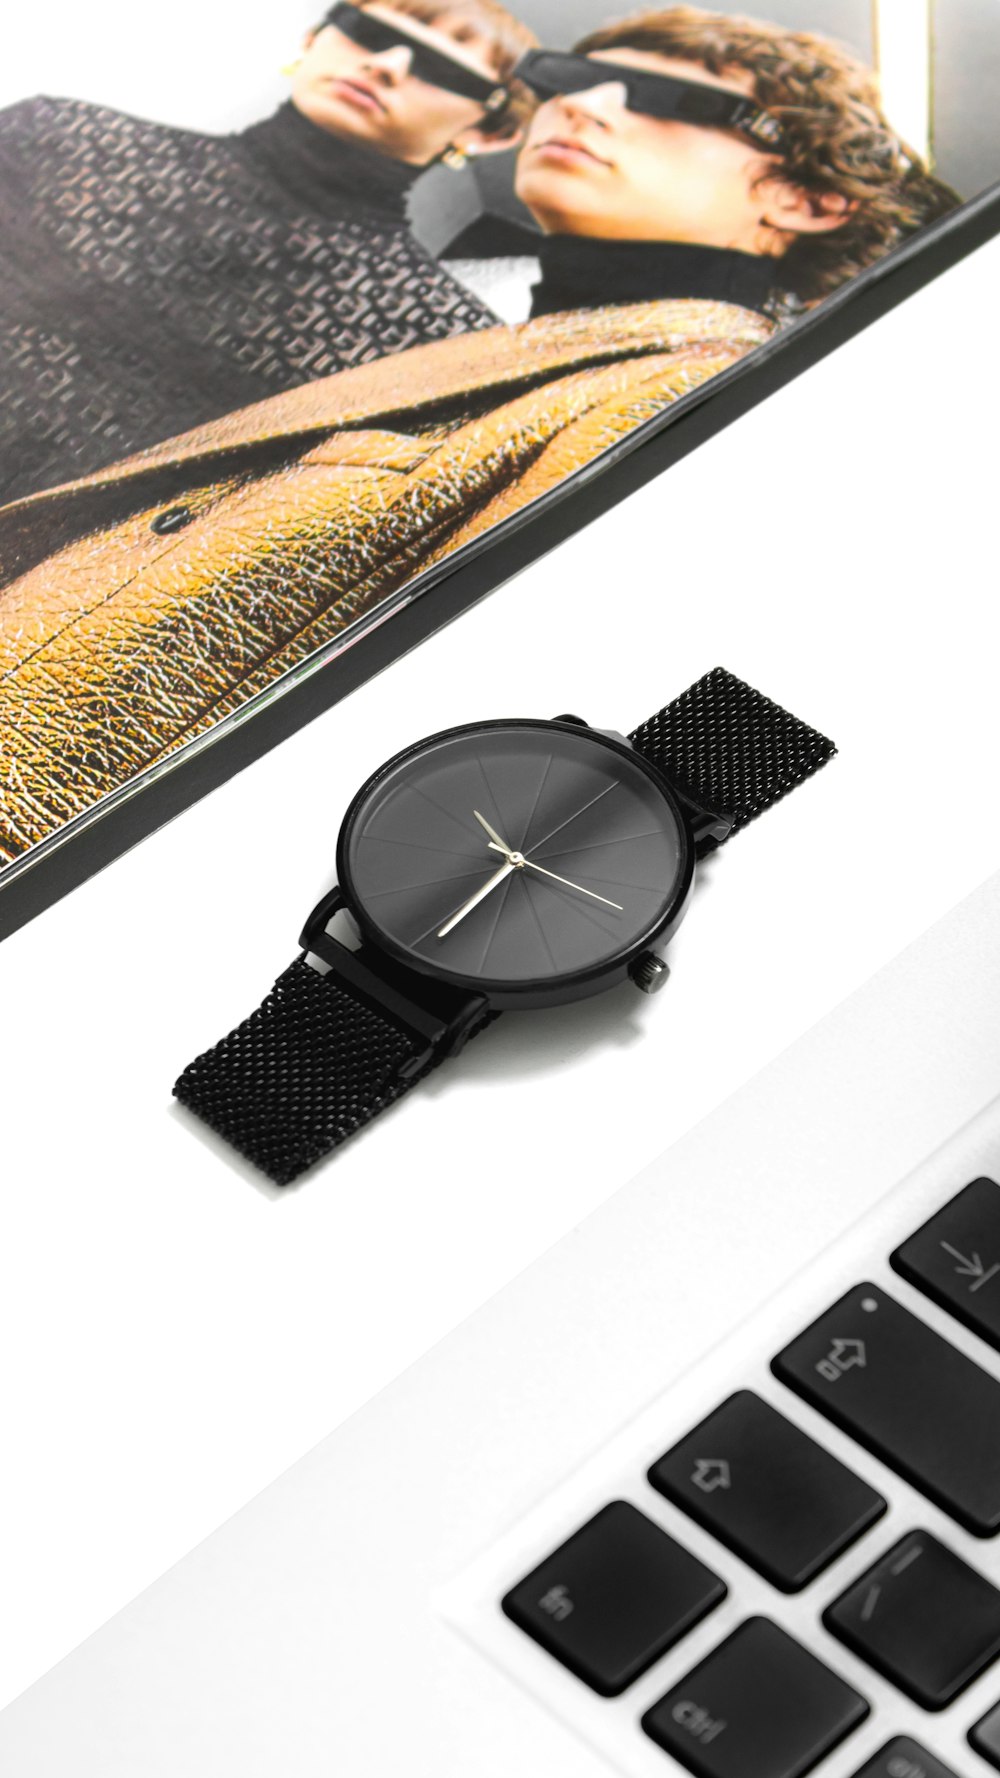 a watch sitting on top of a computer keyboard